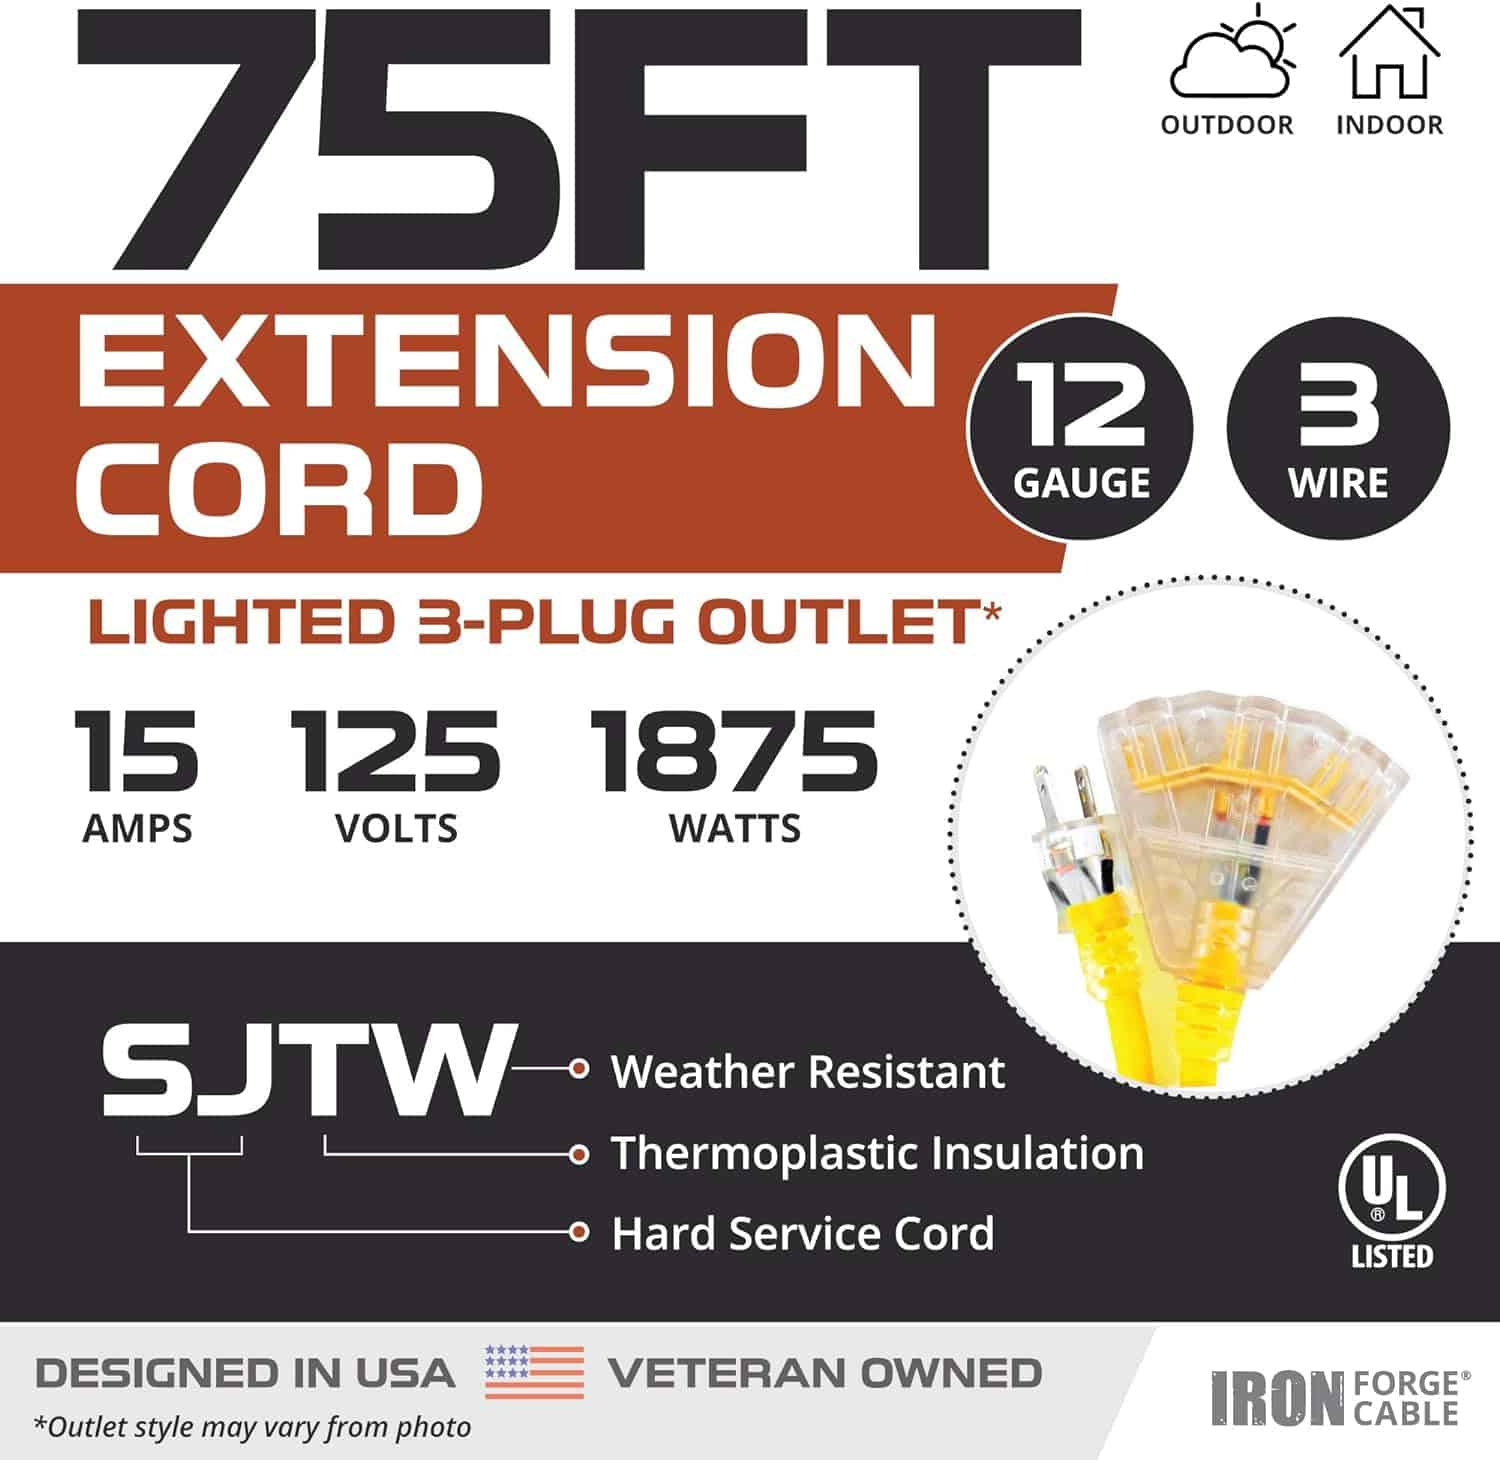 IRON FORGE CABLE 75 Foot Lighted Outdoor Extension Cord with 3 Electrical Power Outlets – 12 3 SJT Heavy Duty Yellow Extension Cable with 3 Prong Grounded Plug for Safety, 15 AMP 2